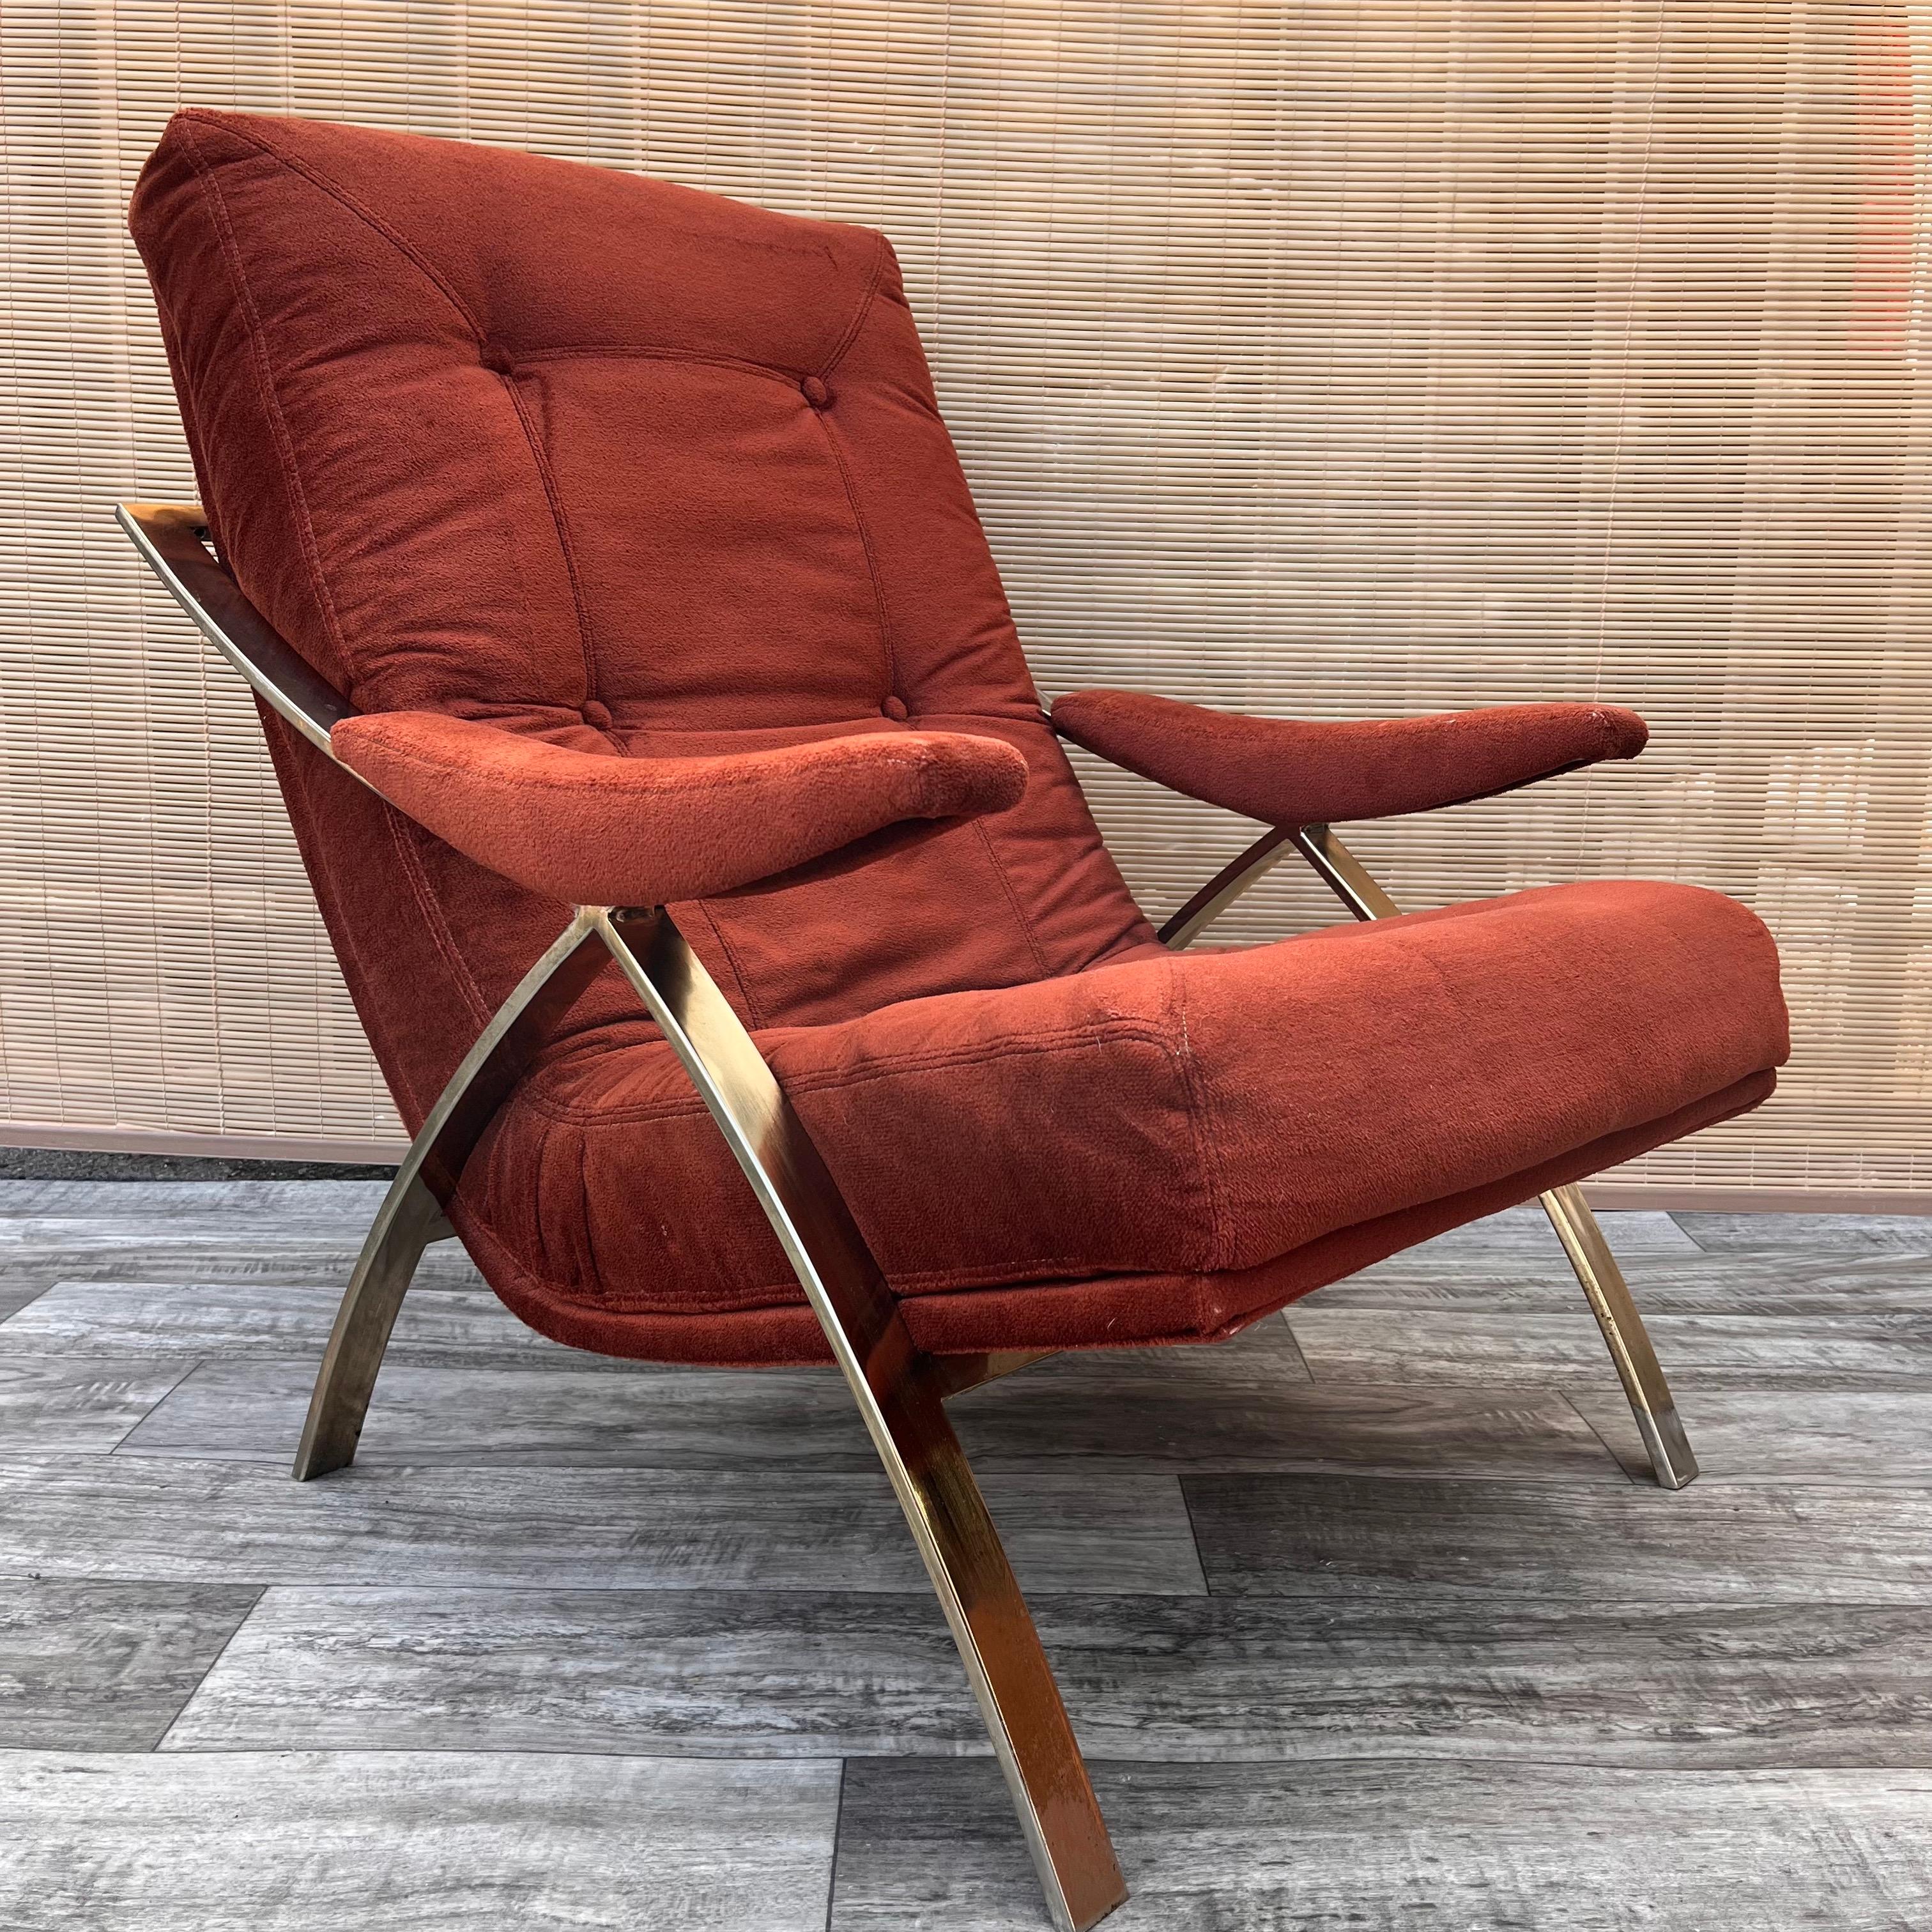 Plated Early 1980s Mid-Century Modern Lounge Chair by Carsons of High Point. 